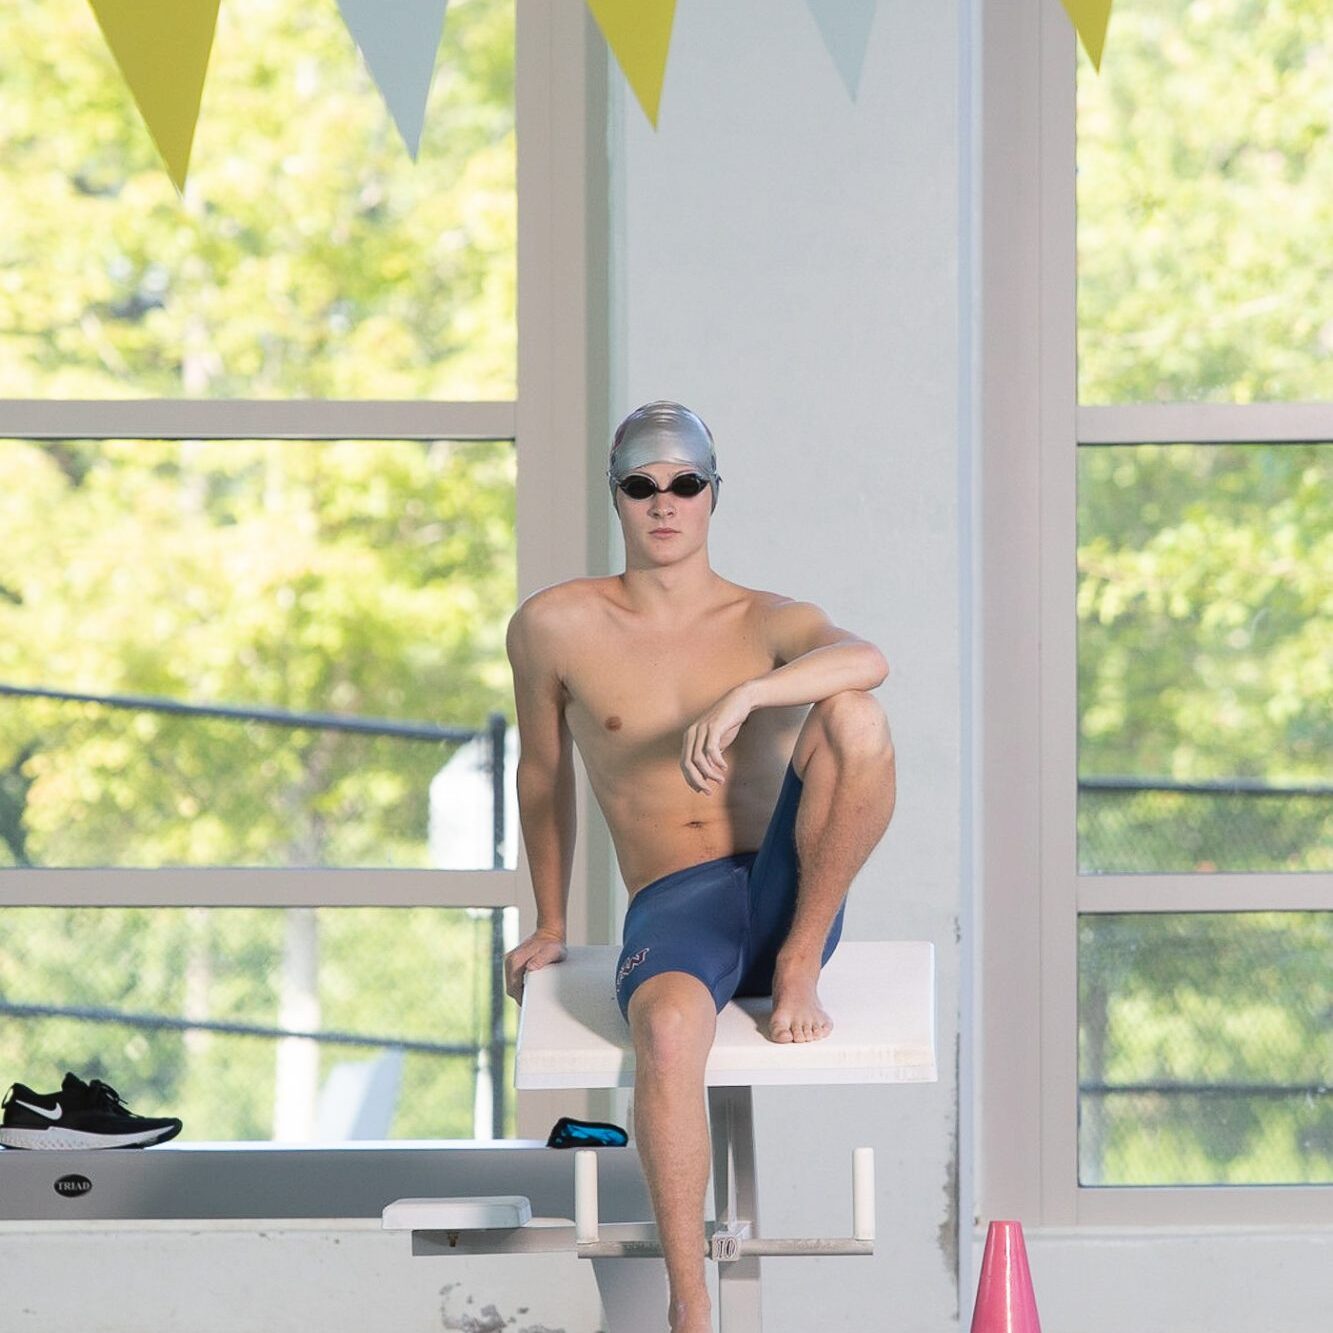 Woodstock High School senior swimmer wearing his swim cap, goggles, and speedo while sitting on the diving block